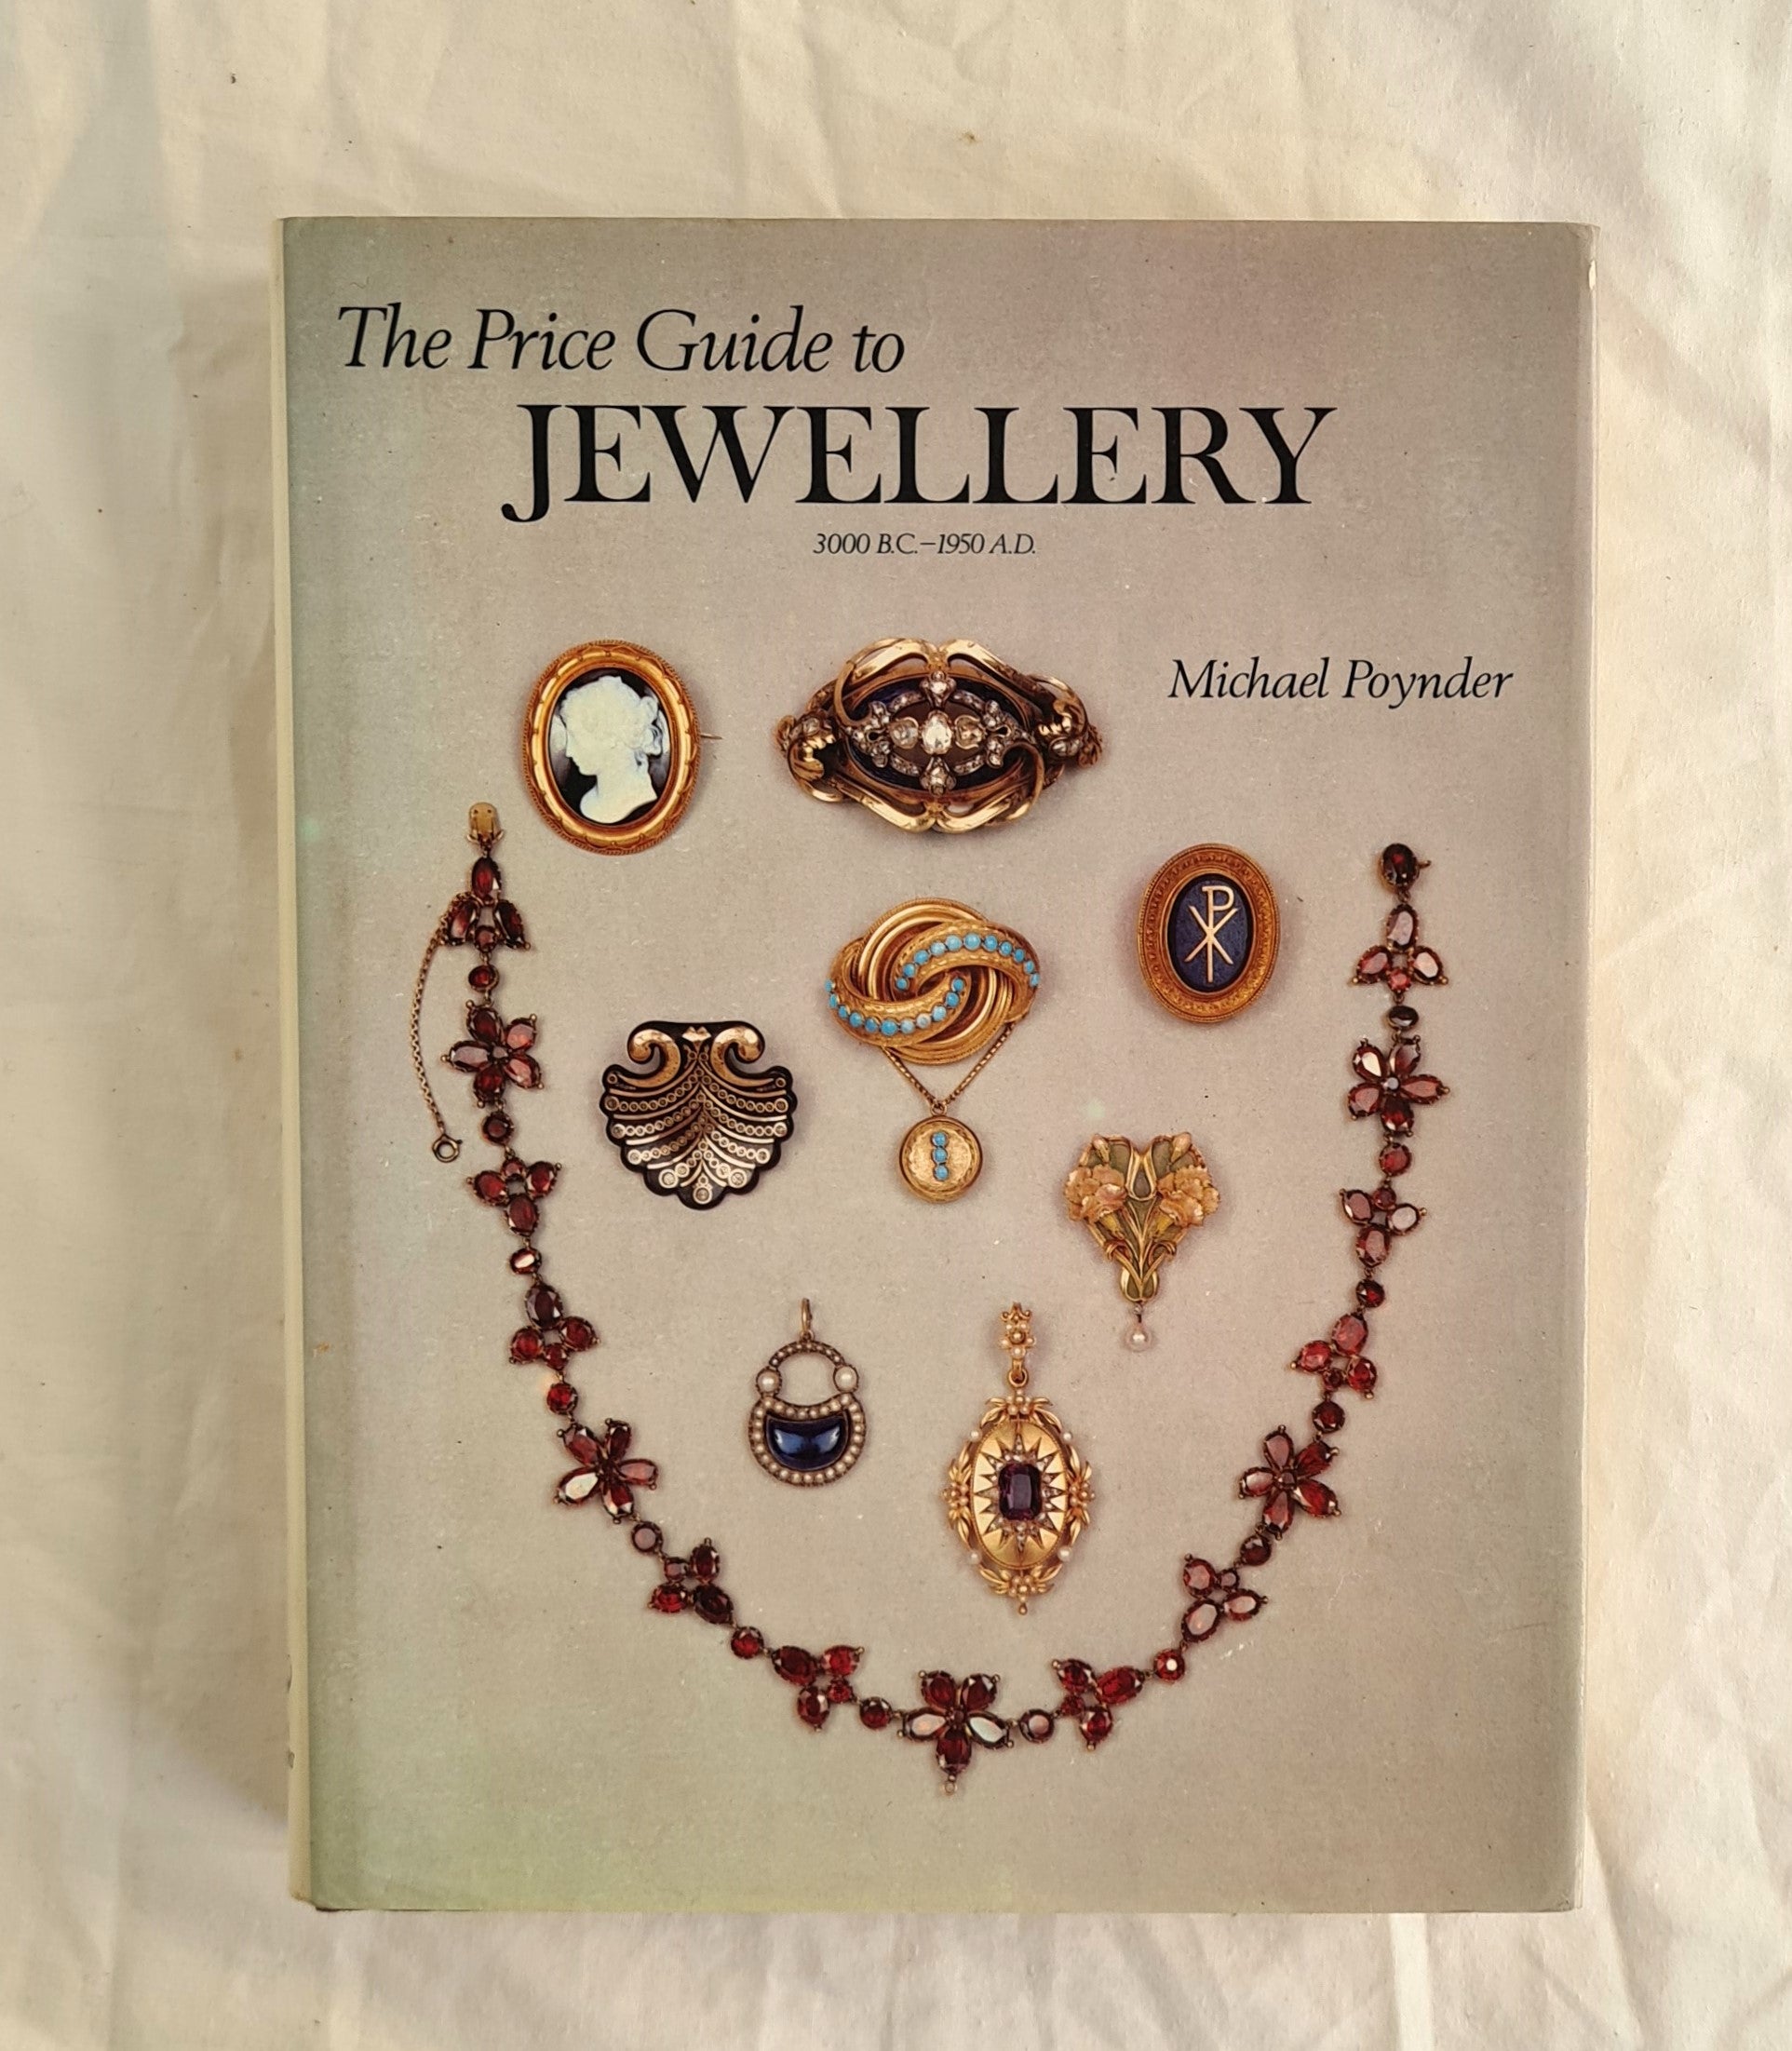 The Price Guide to Jewellery  3000 B.C. – 1950 A.D.  by Michael Poynder